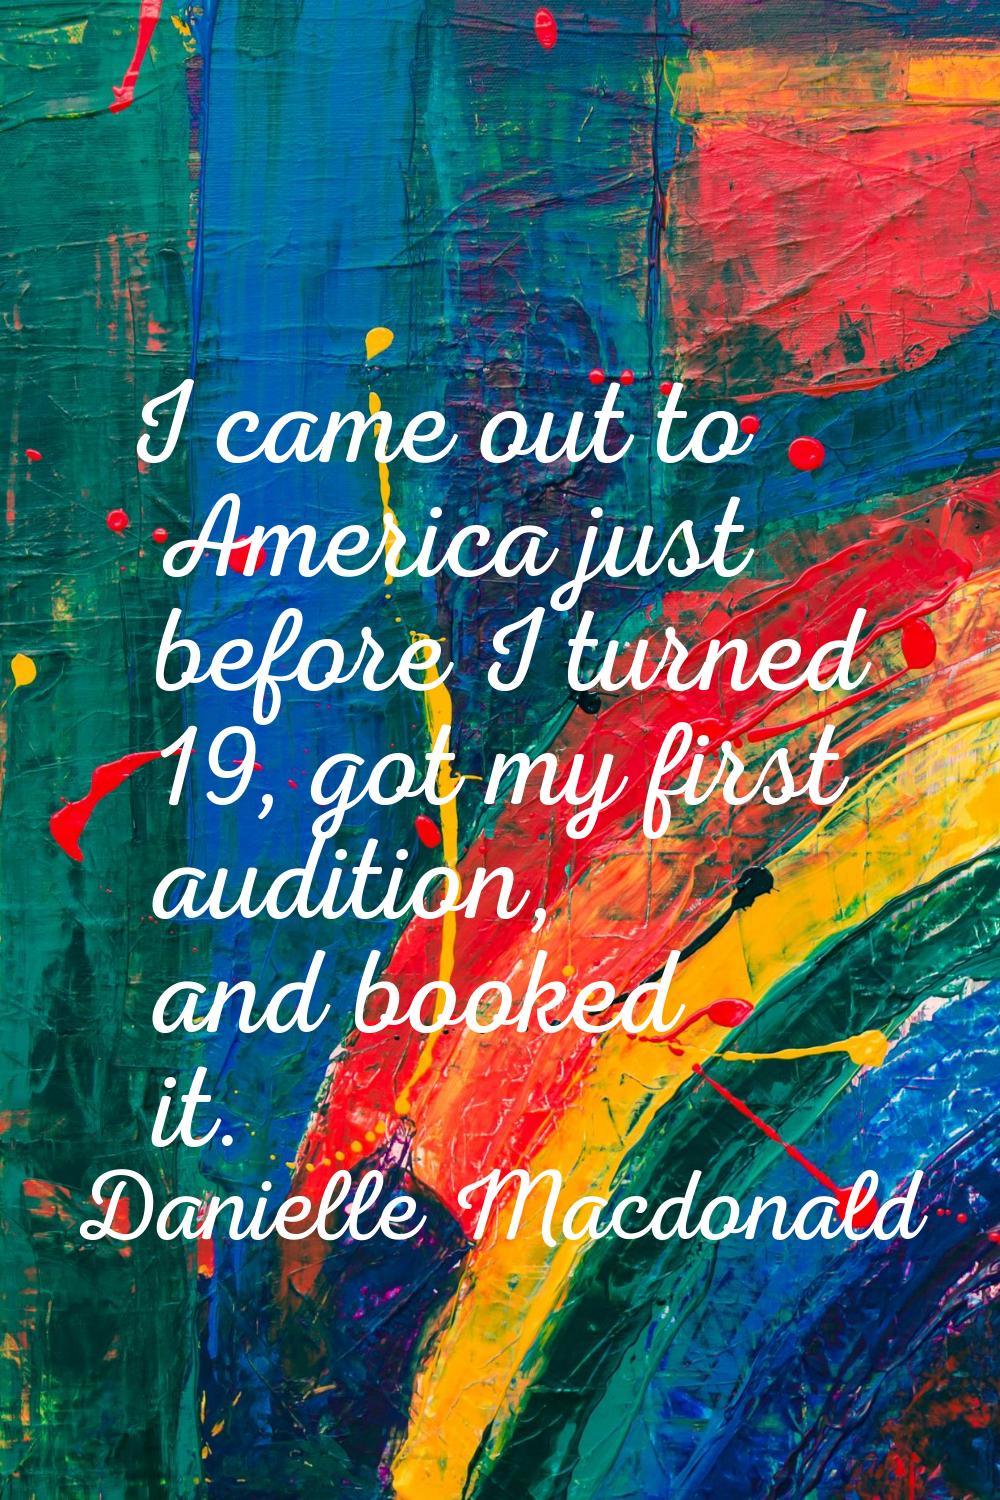 I came out to America just before I turned 19, got my first audition, and booked it.